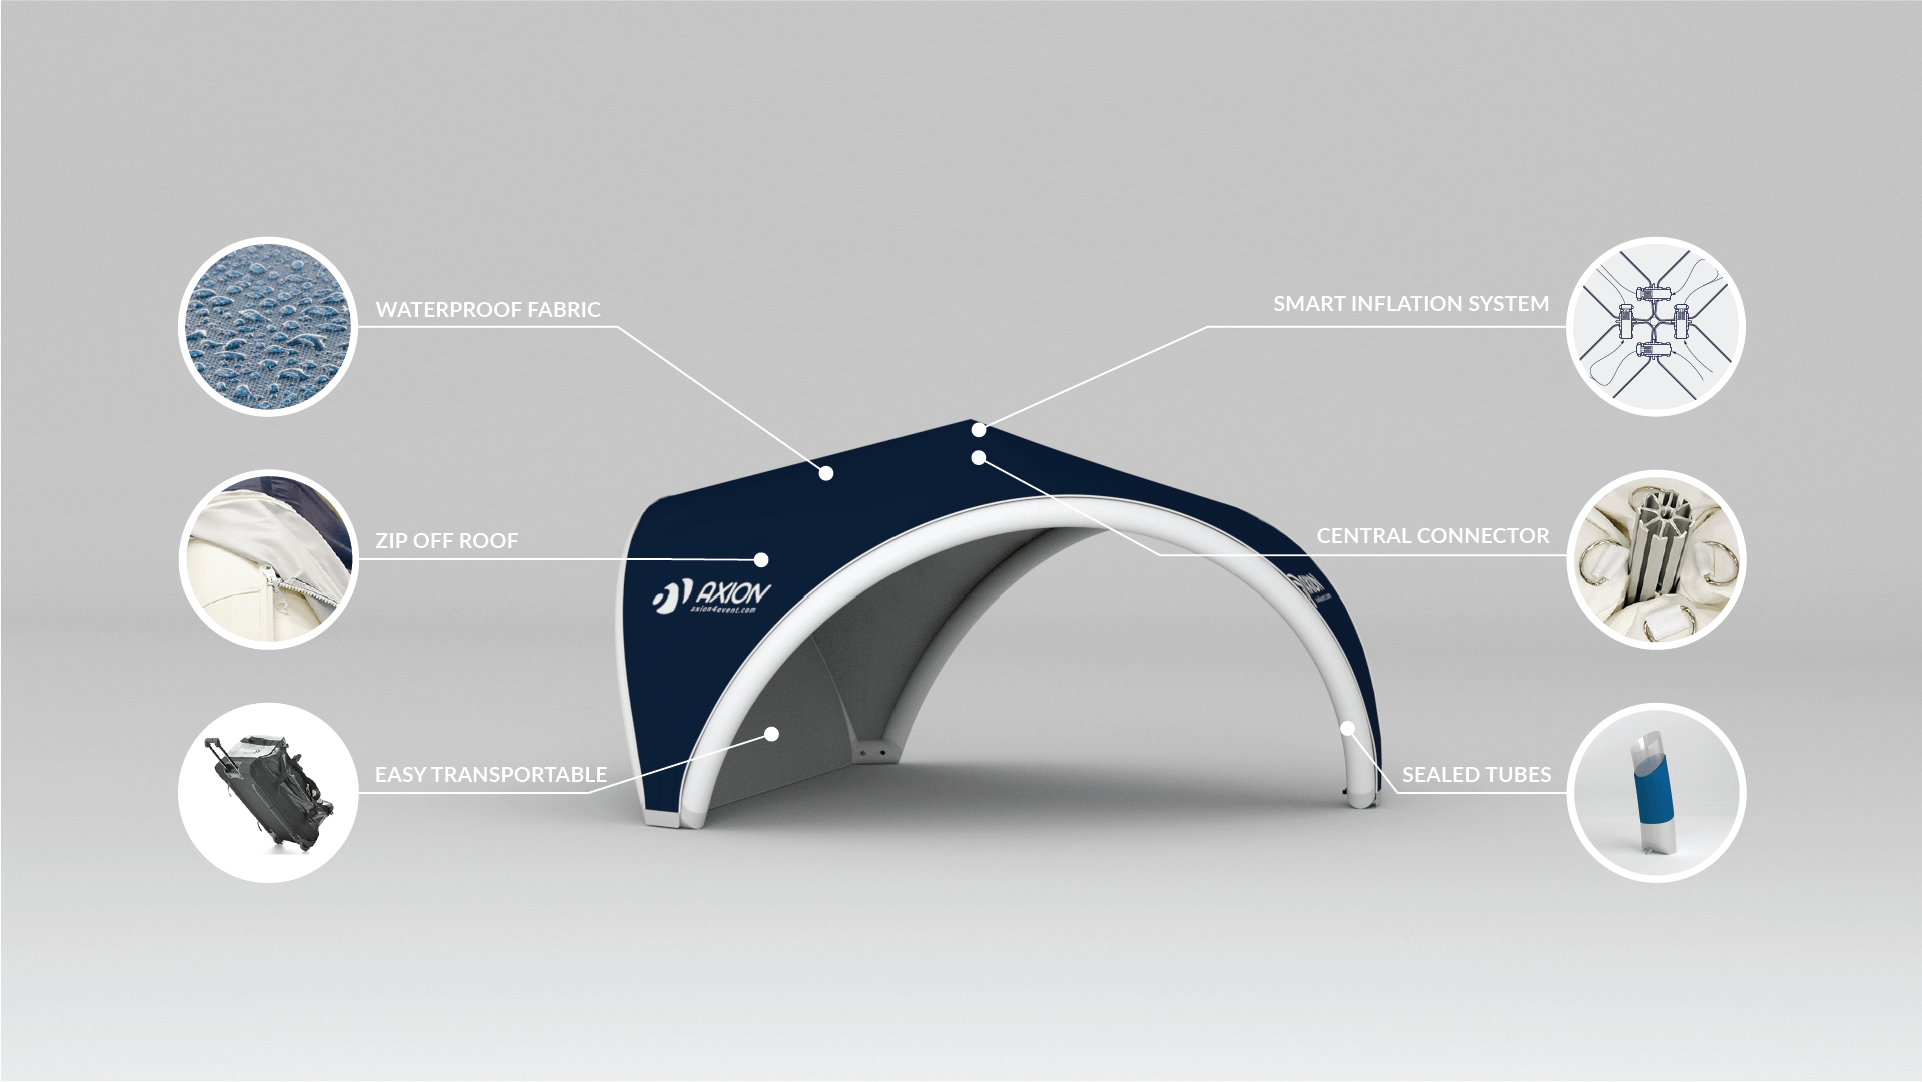 axion-tripod-tent_main-feature